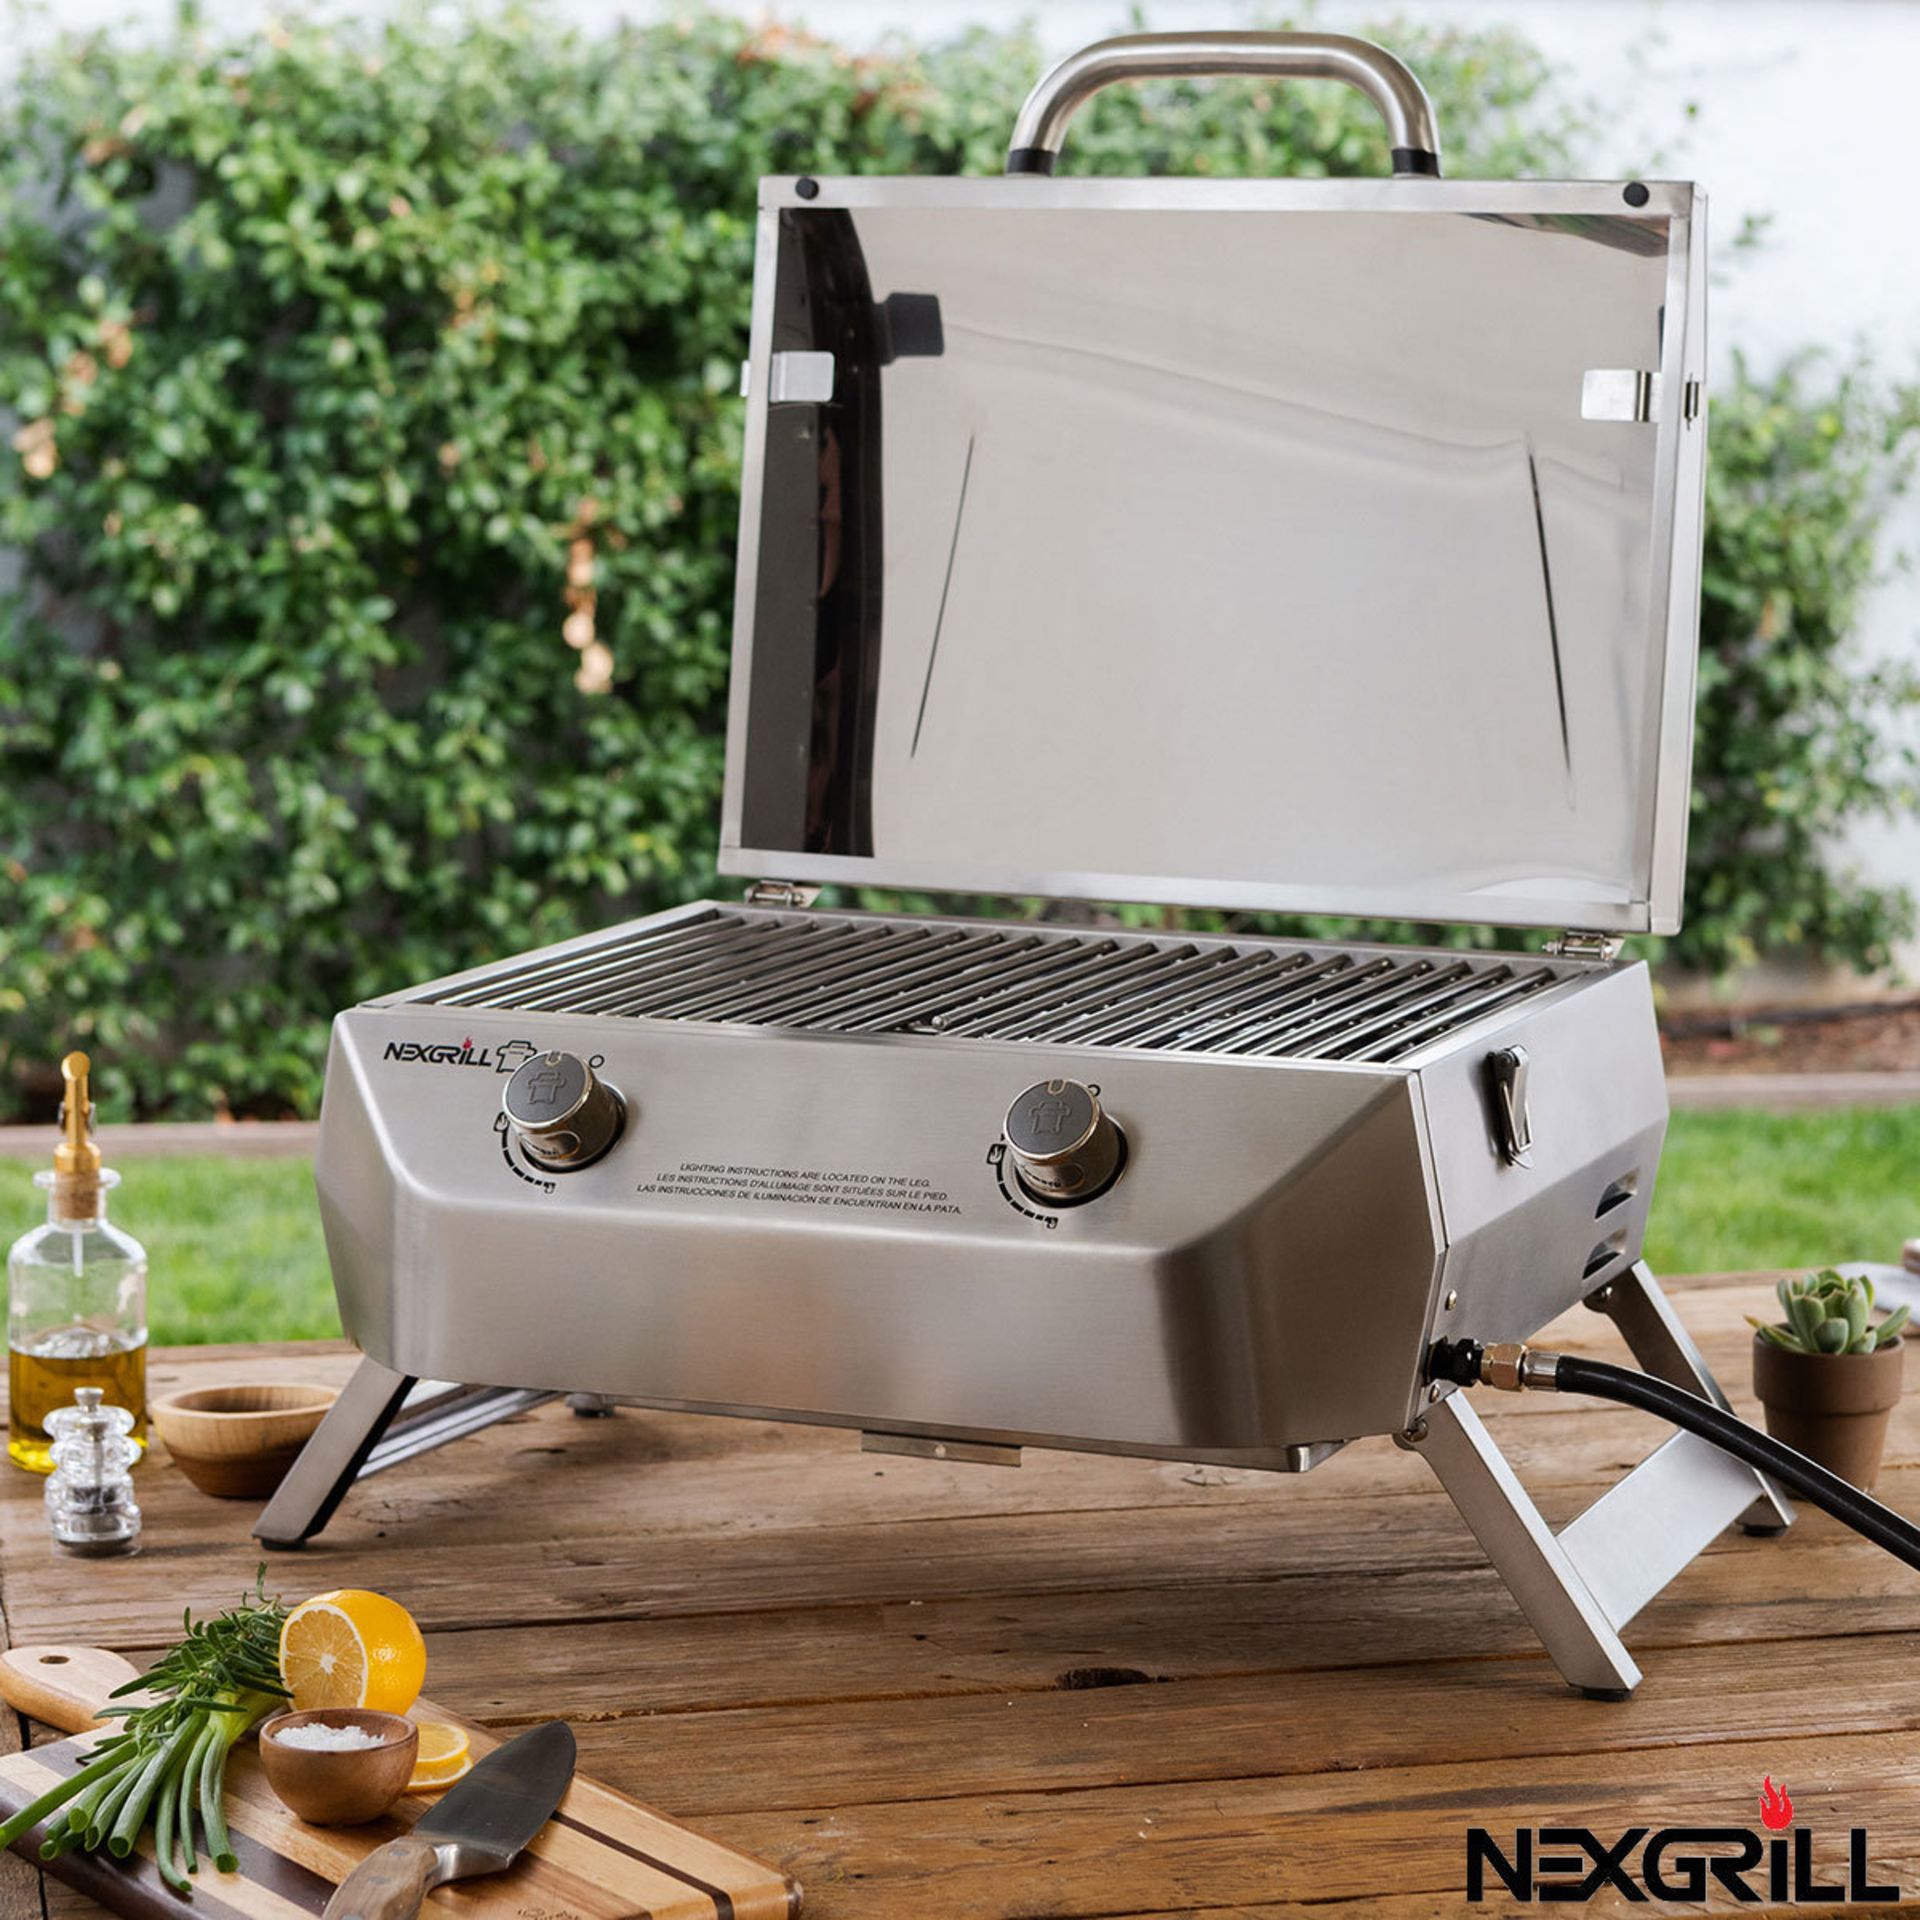 1 BOXED NEXGRILL 2 BURNER STAINLESS STEEL TABLE TOP GAS BARBECUE RRP Â£149